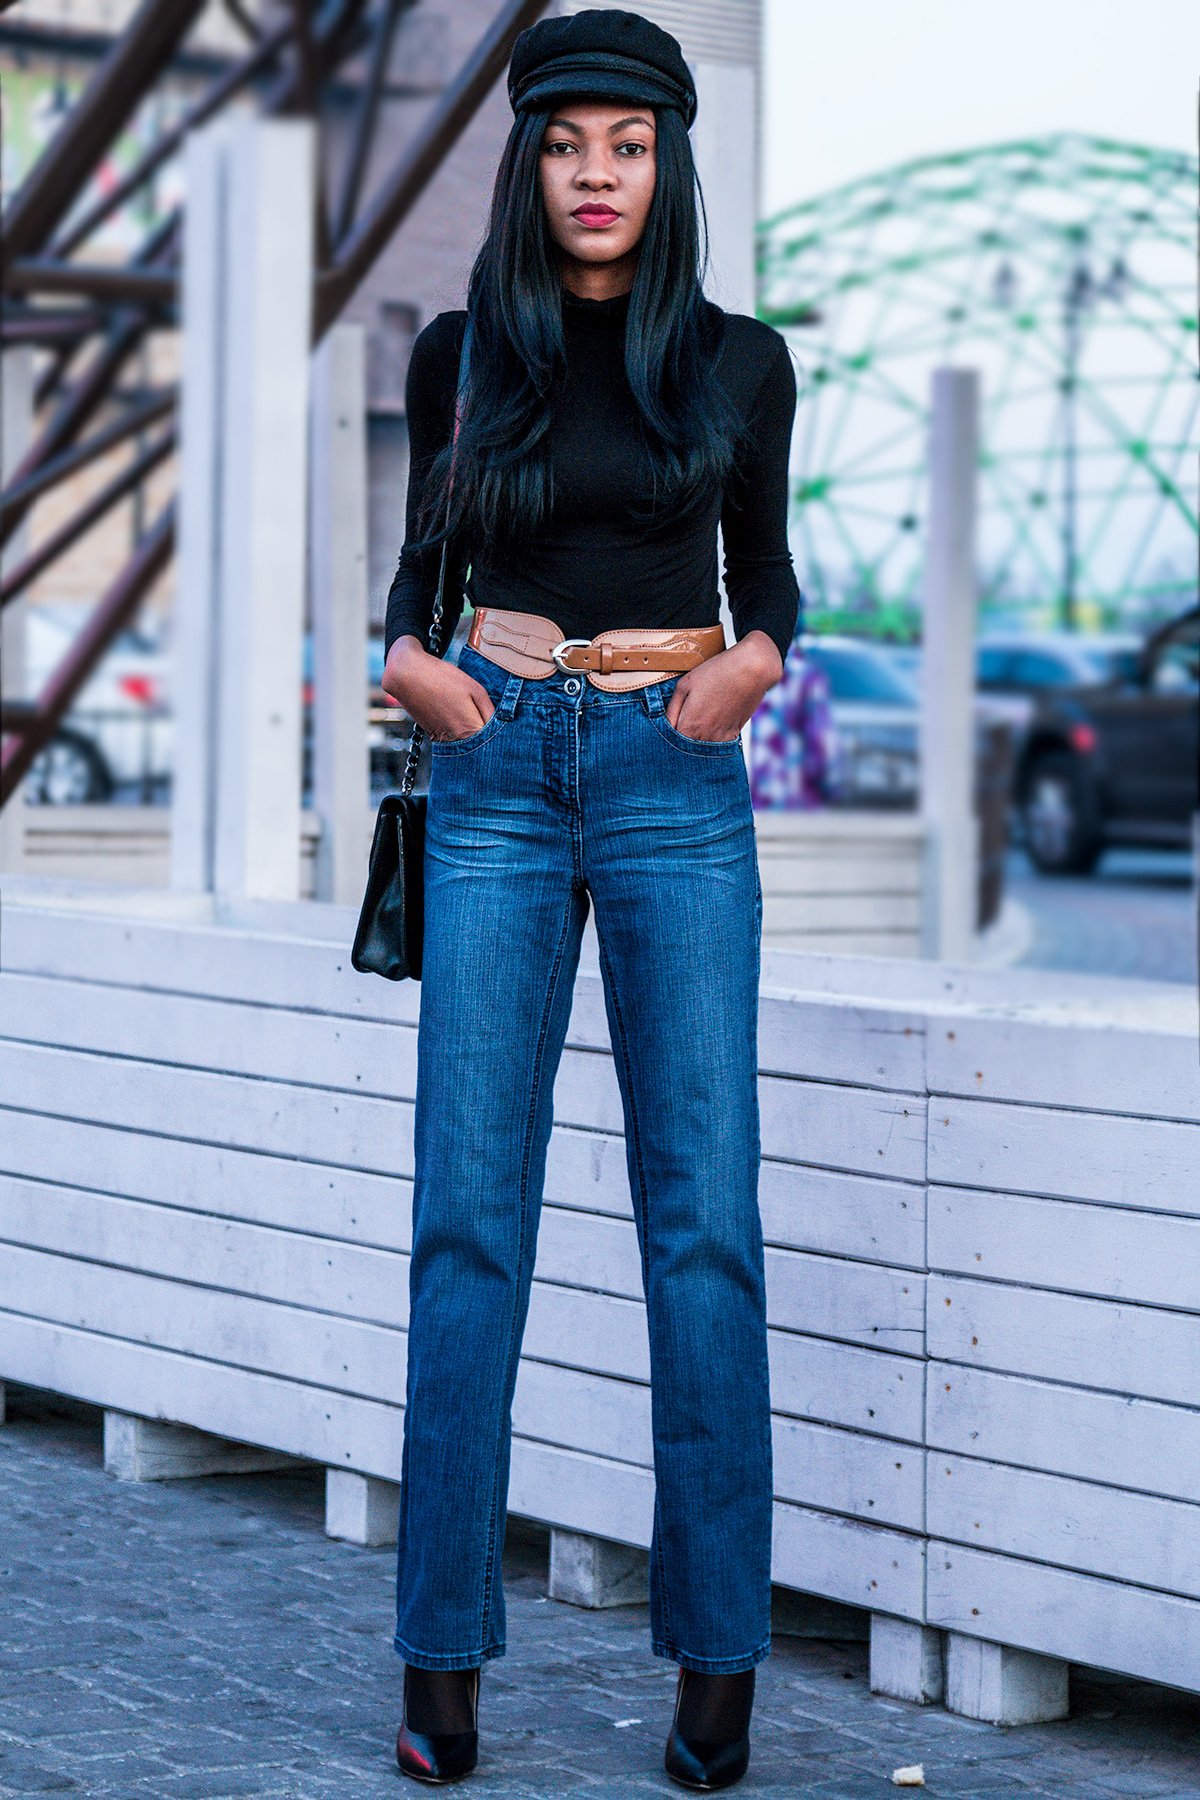 70s retro chic look in wide leg jeans